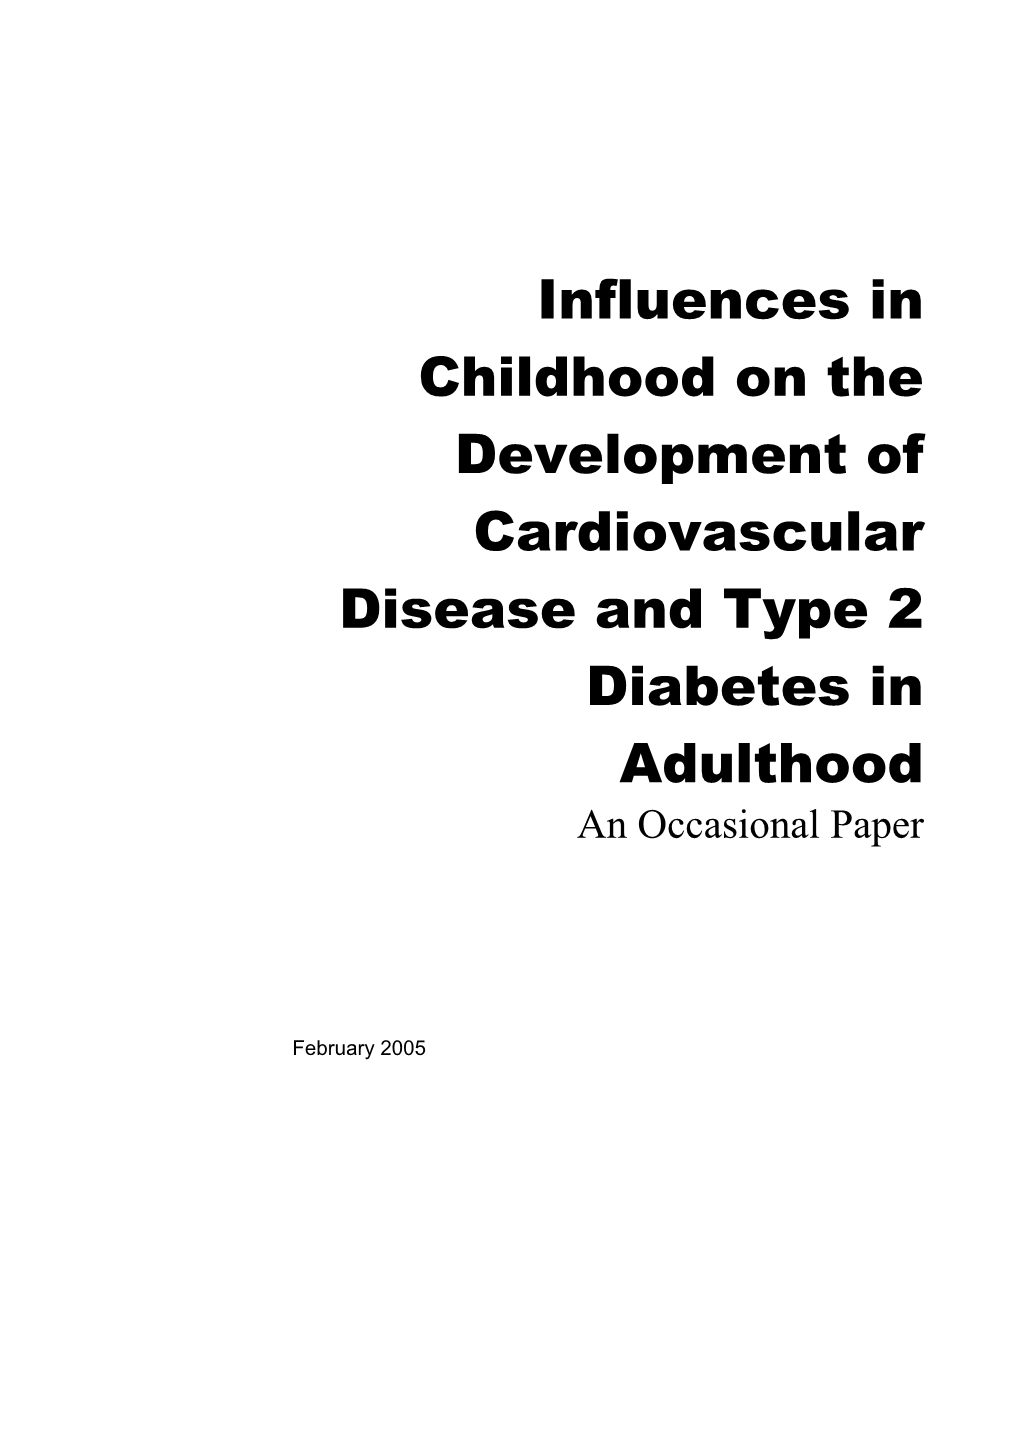 Influences in Childhood on the Development of Cardiovascular Disease and Type 2 Diabetes